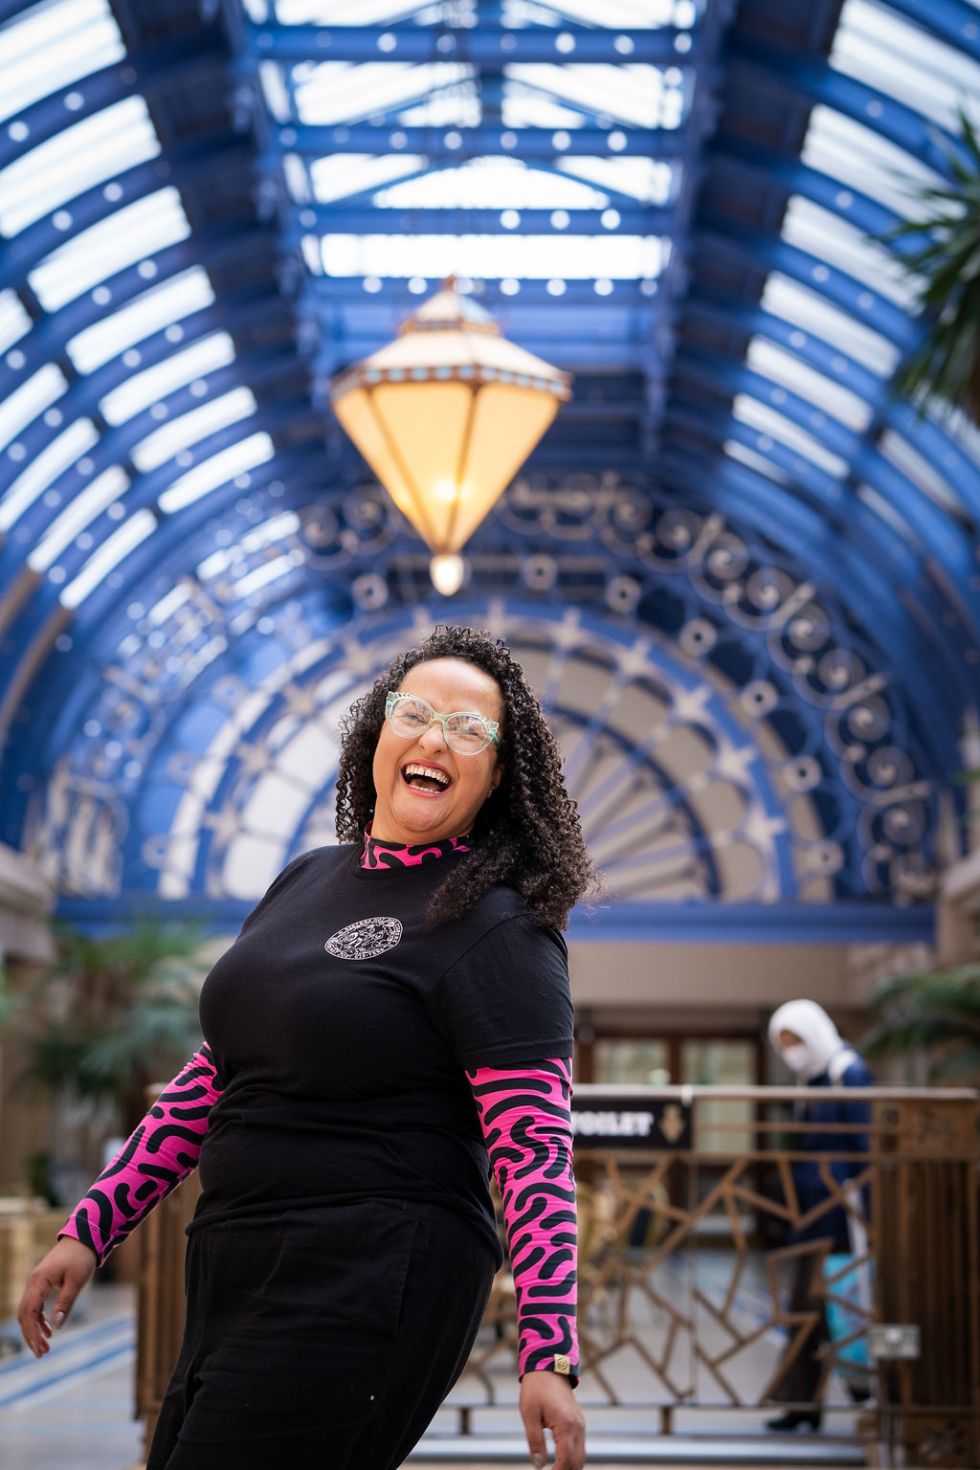 Catherine Mugonyi at Winter Gardens, Front Shot. Image by Rachel Ovenden.